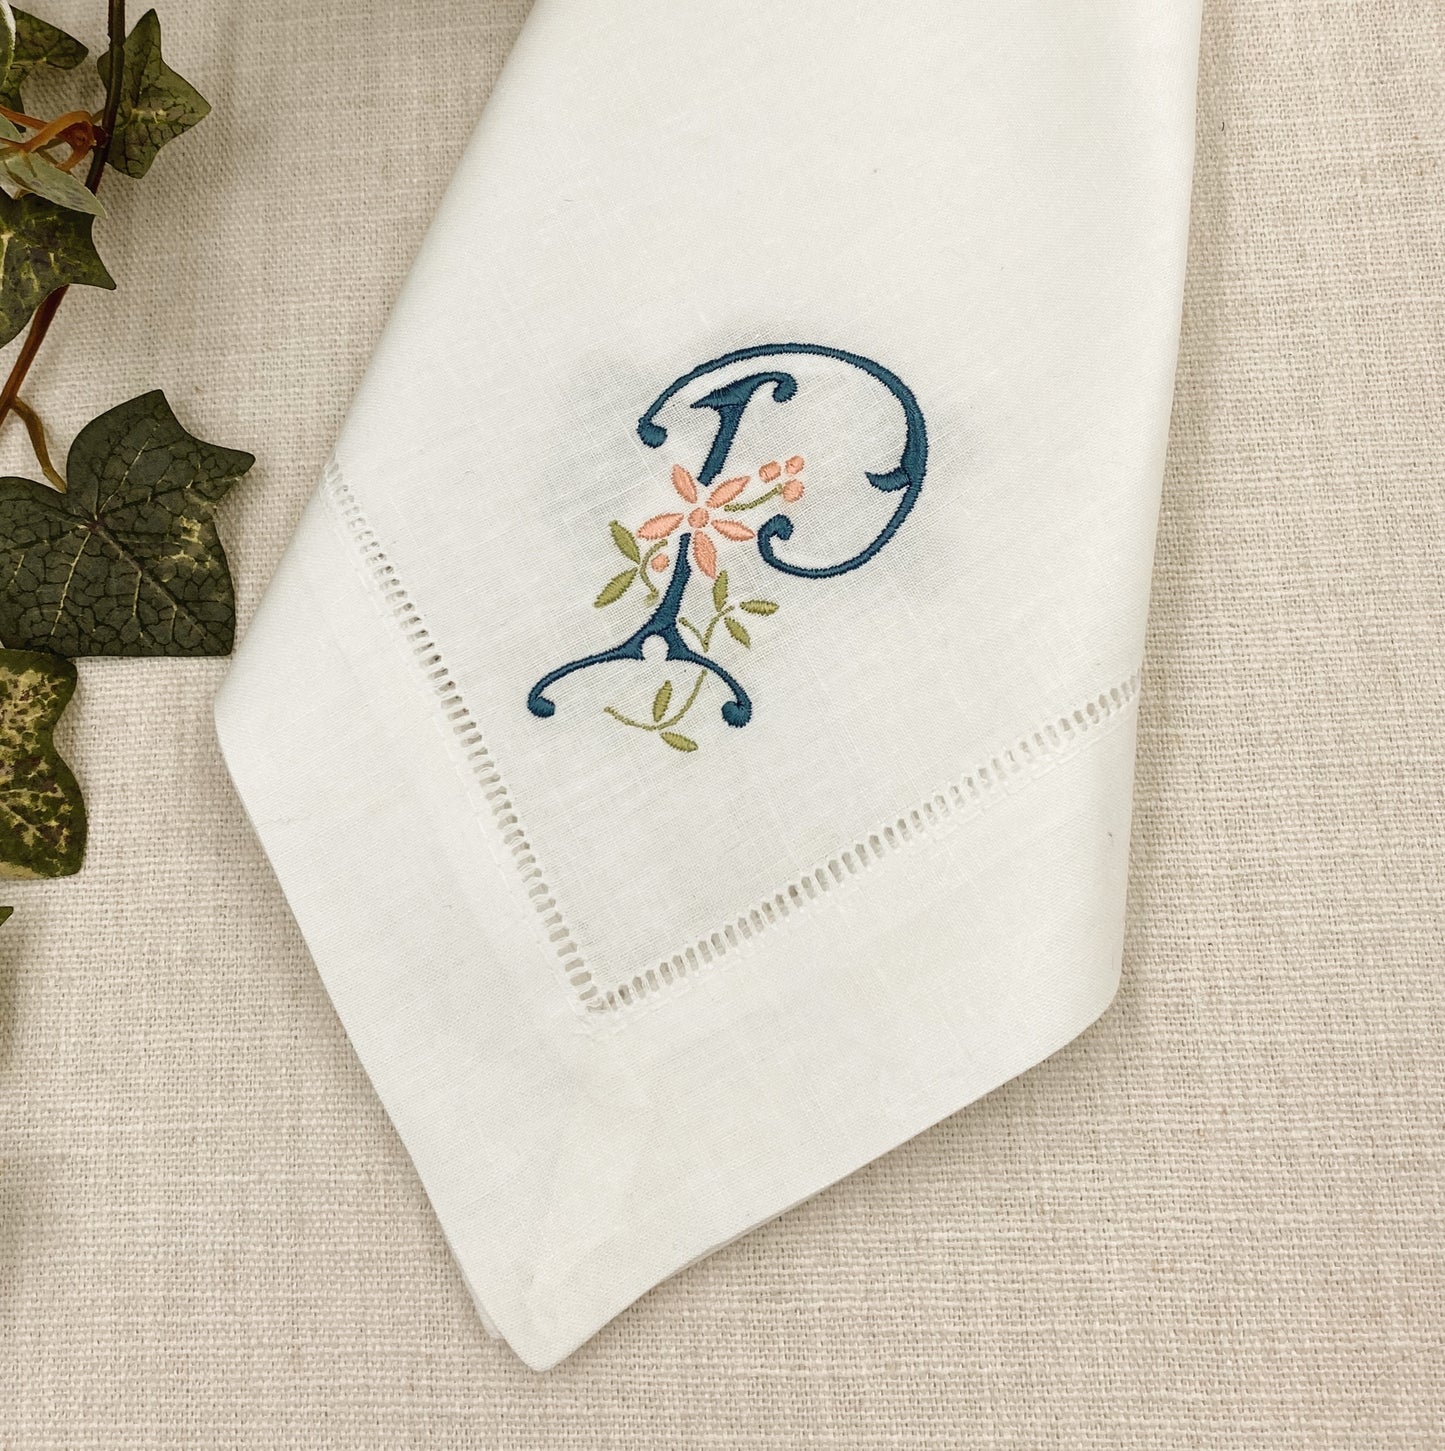 White hemstitch napkin with monogram angled on corner with the letter "P" in Copenhagen blue thread 